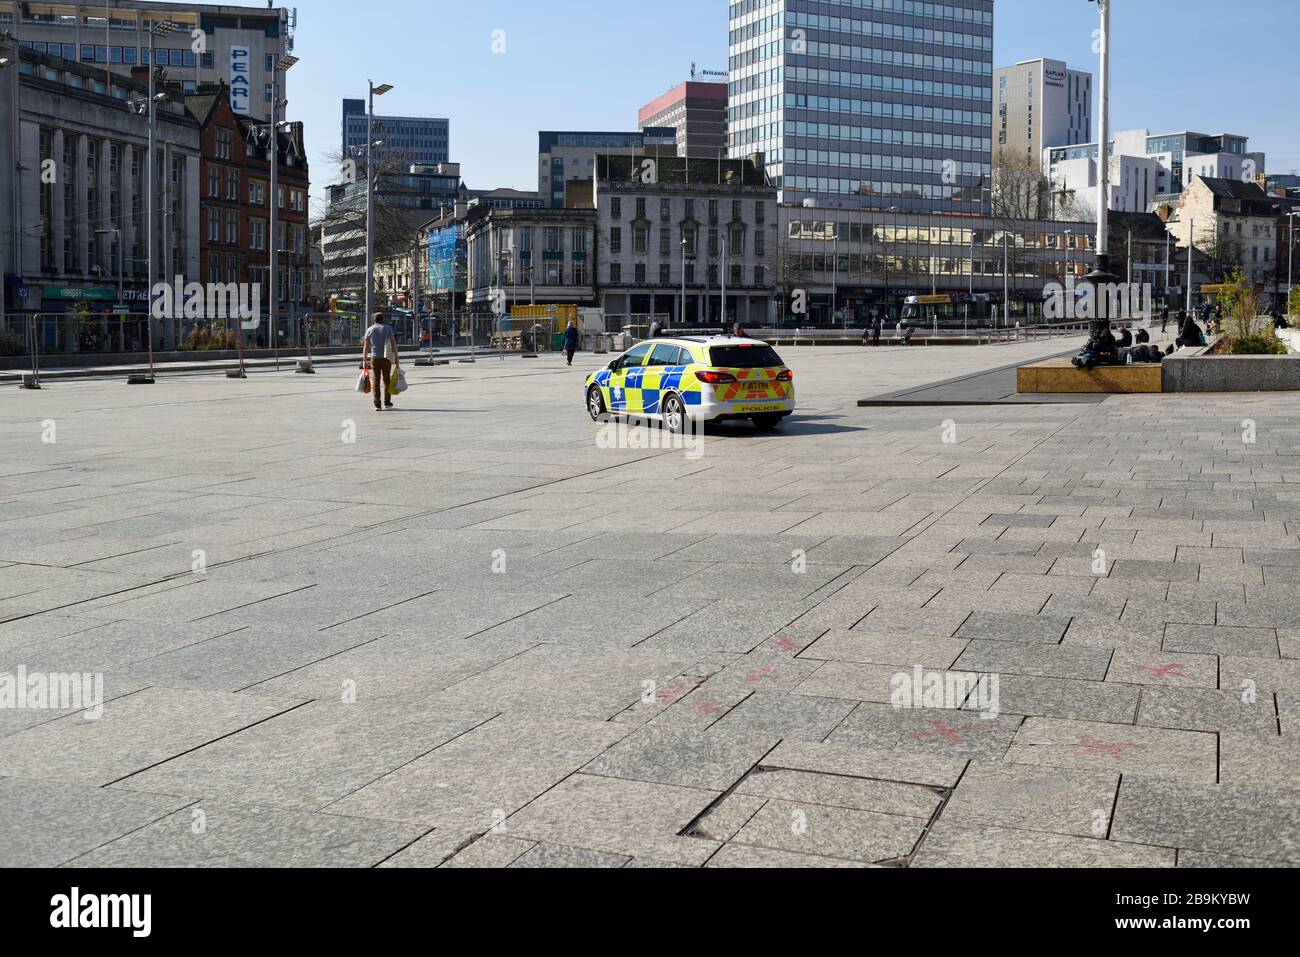 Nottingham, UK. 24th Mar 2020. New Government measures telling the public to stay at home for at least three weeks to help combat Coronavirus spread. Empty streets Nottingham city centre. Credit: Ian Francis/Alamy Live News Stock Photo